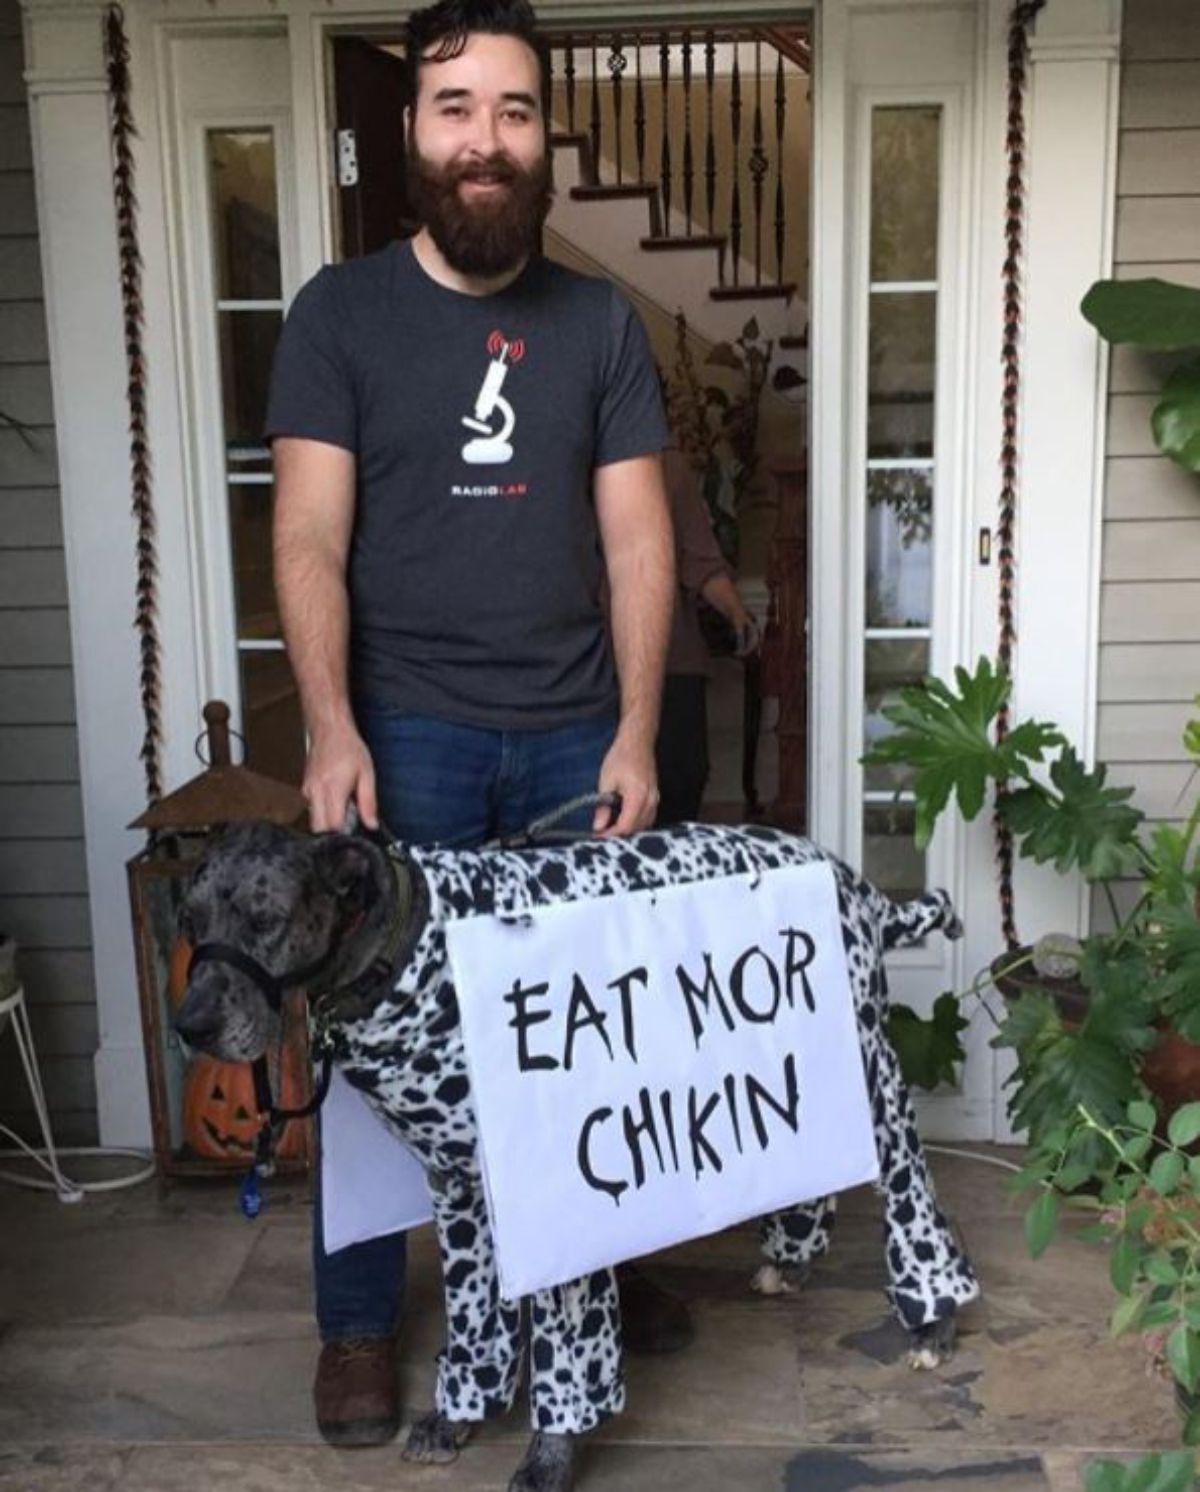 Great Dane in cow costume with a note "Eat more chikin"